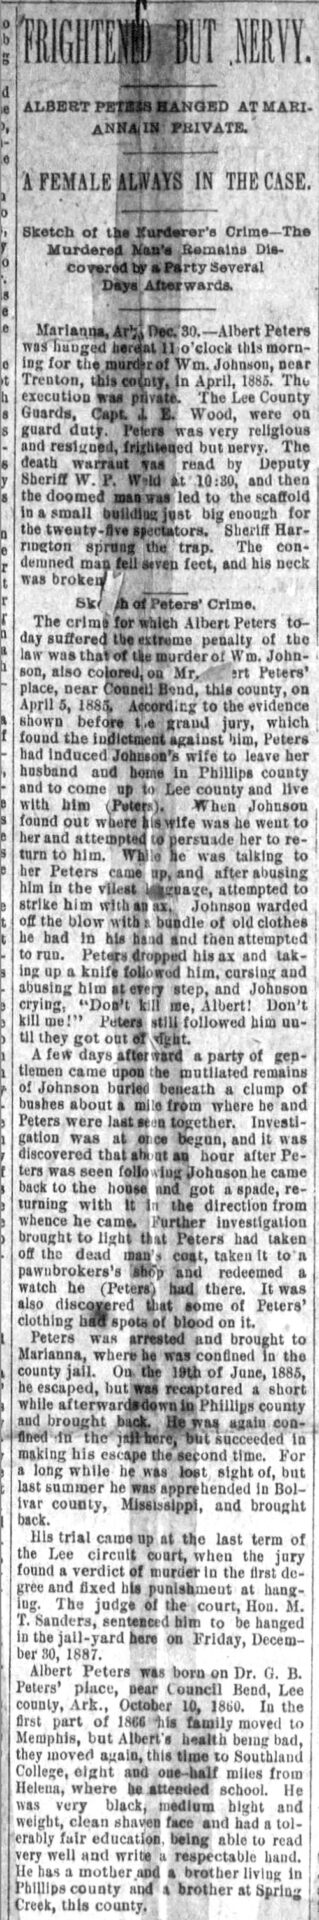 "Frightened but Nervy" newspaper clipping